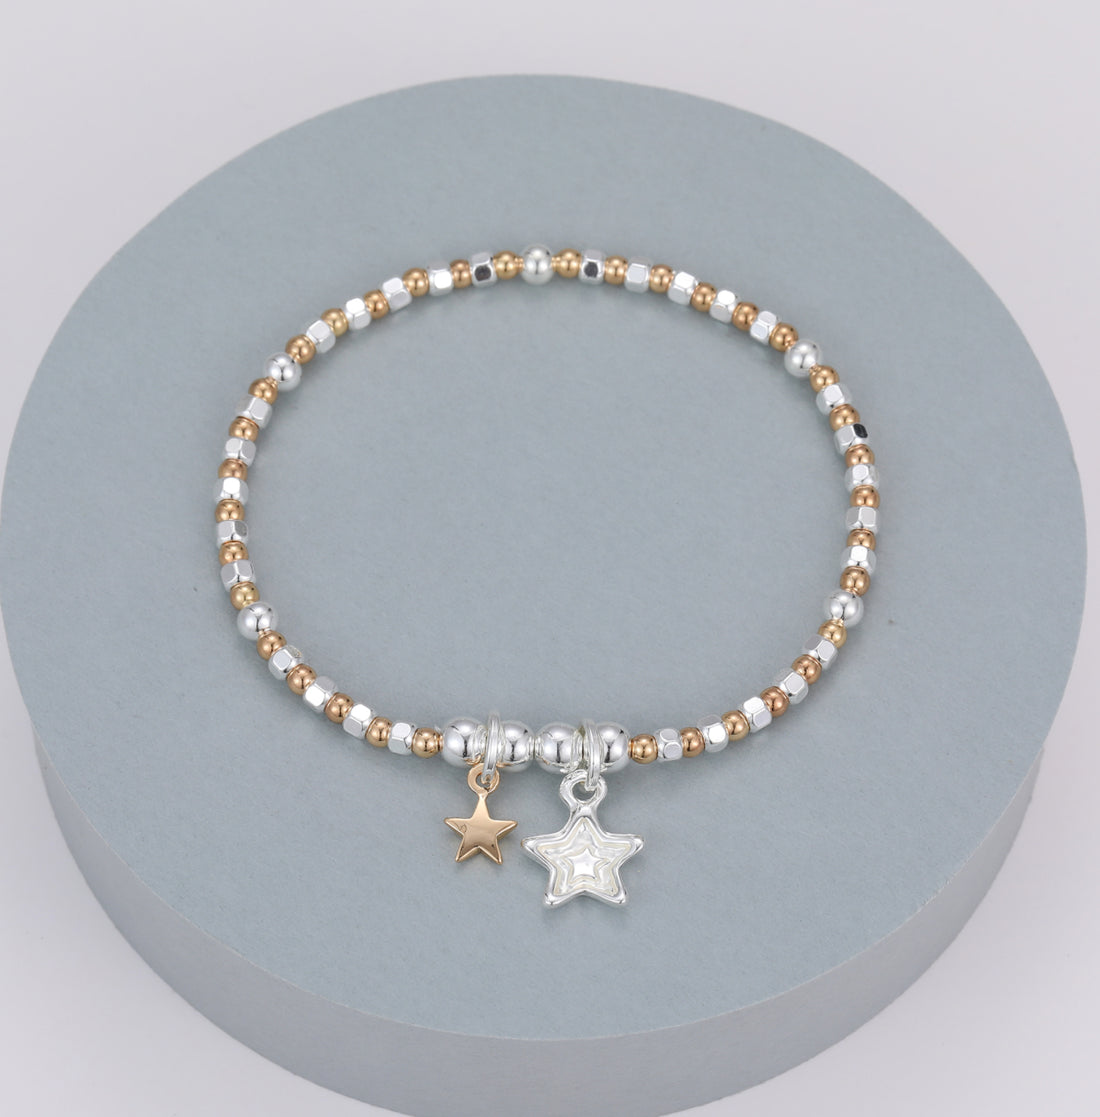 Beaded Bracelet In Multi with Twin Star Charms